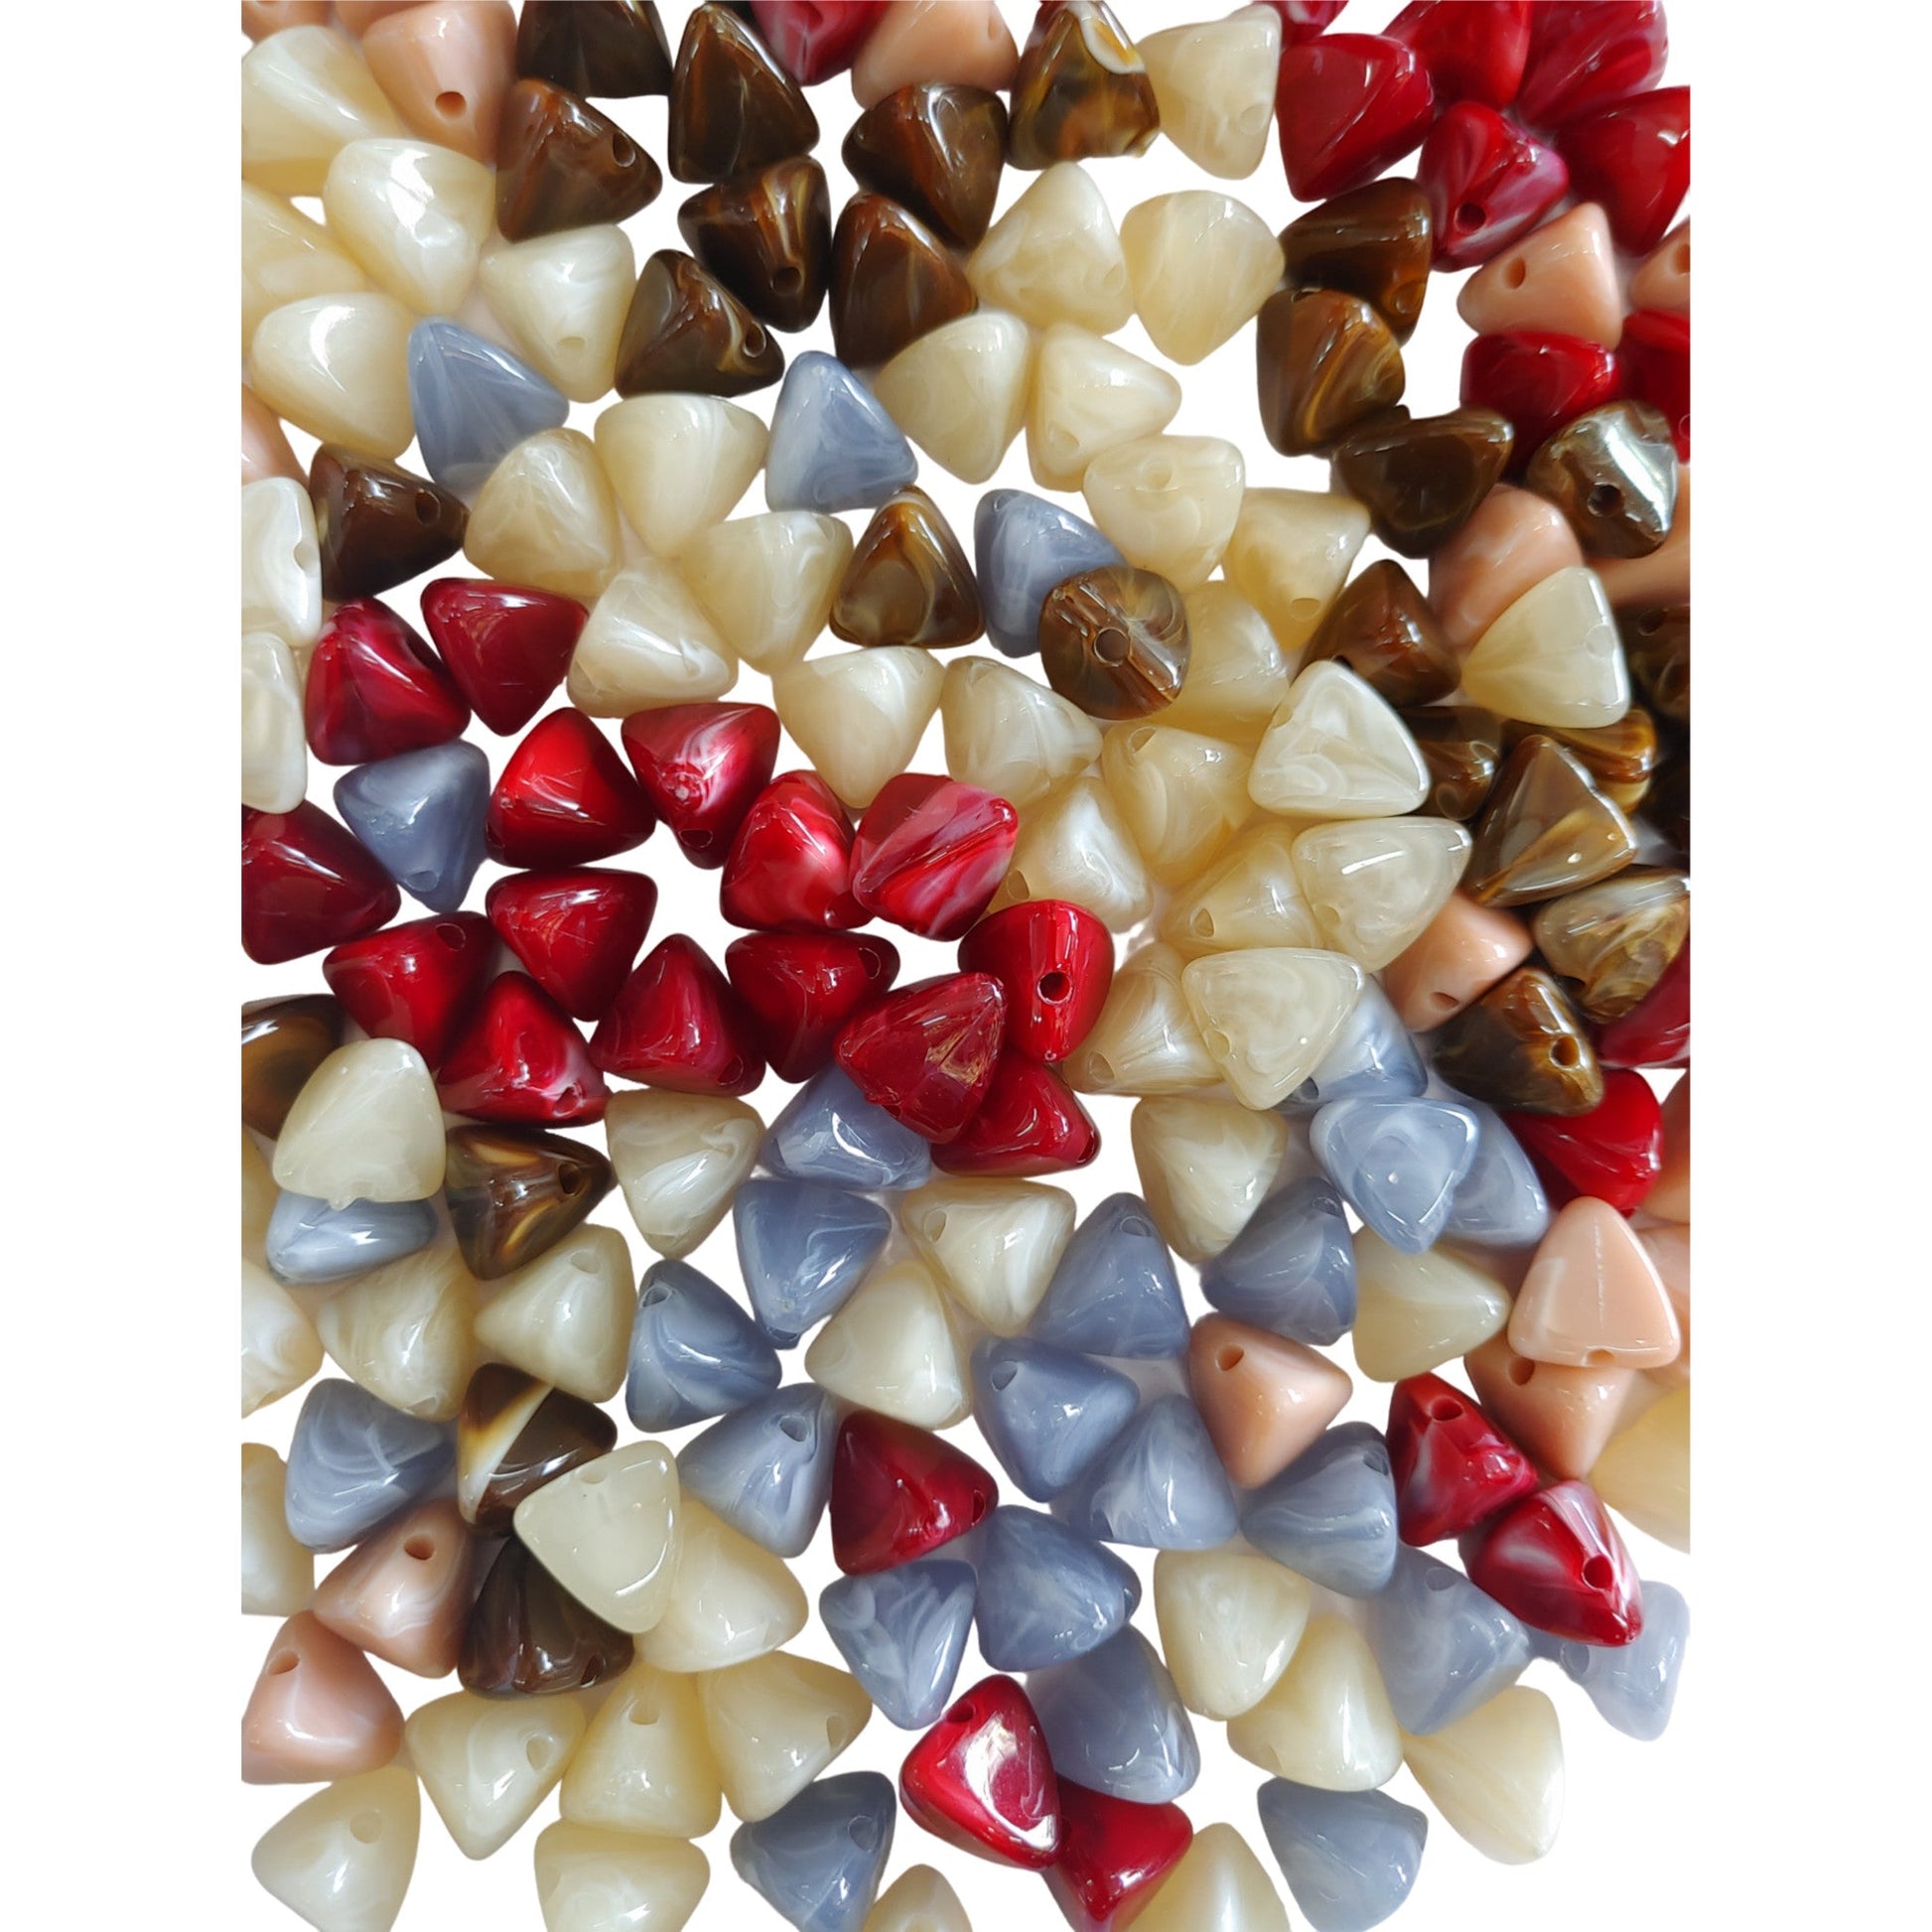 Indian Petals Indian Perals Pyramid Shaped Color Marble Beads Ideal for Jewelry designing and Craft Making or Decor